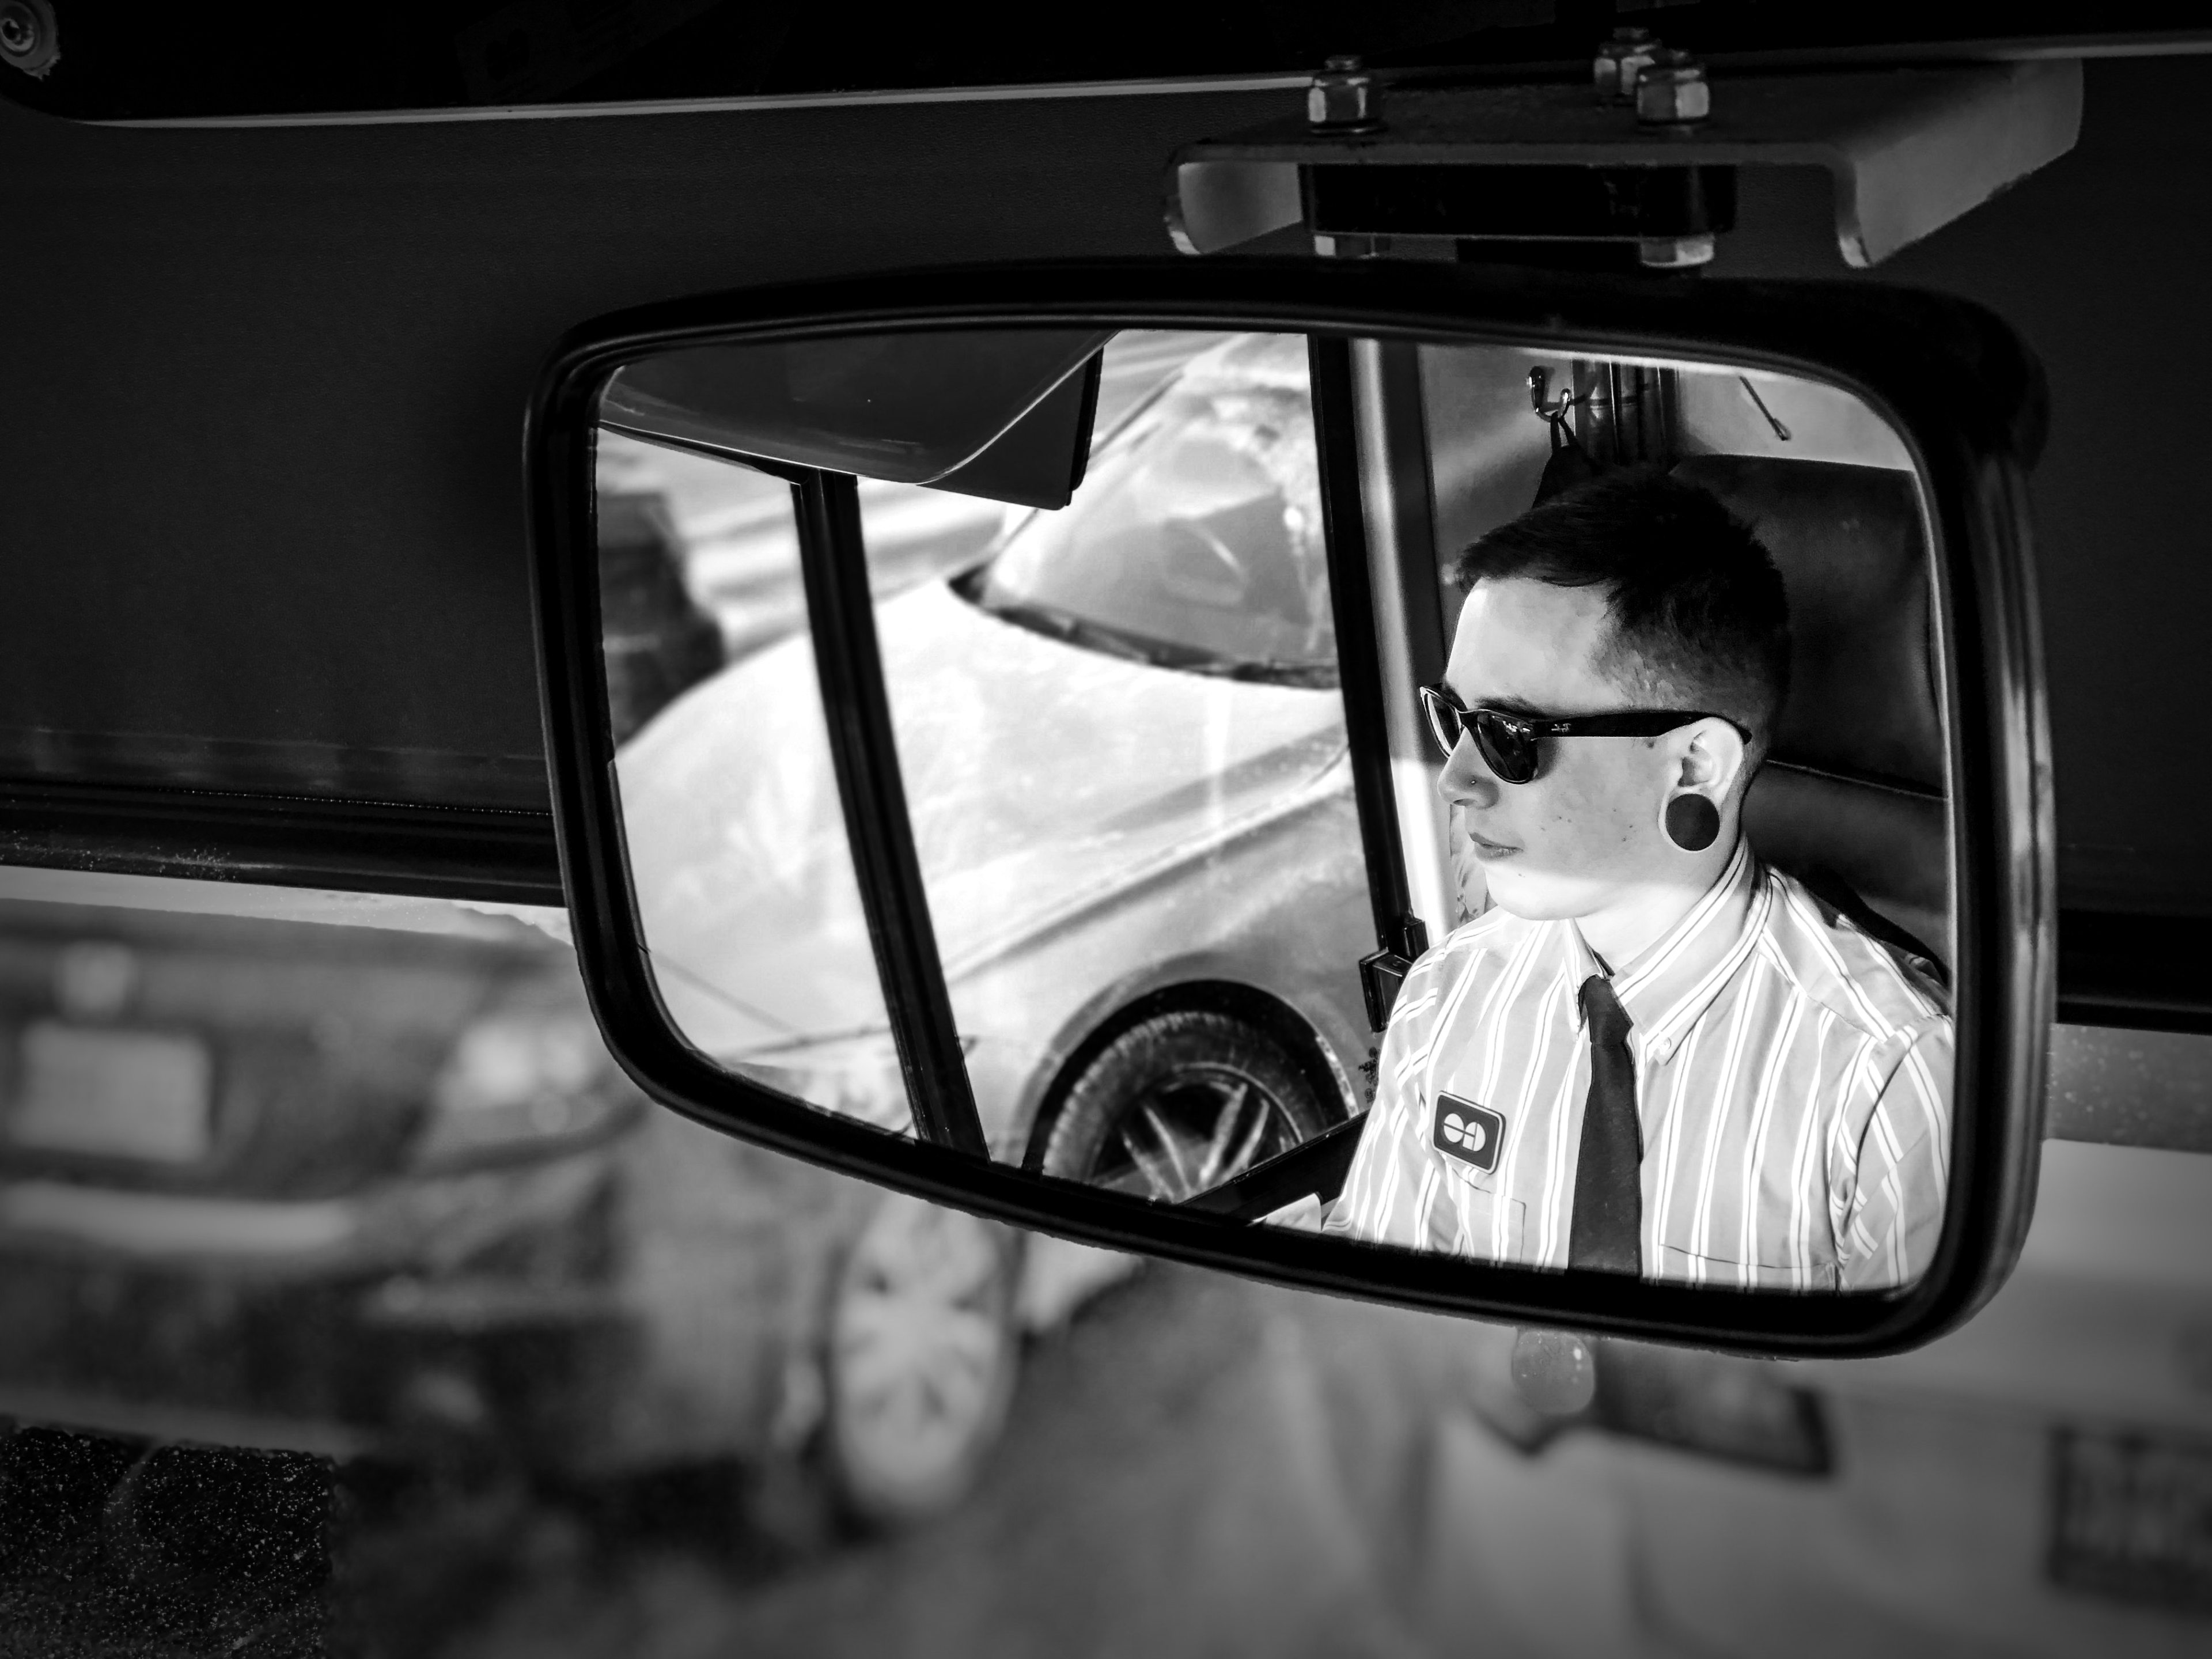 A bus driver is seen in a reflection of his mirror.